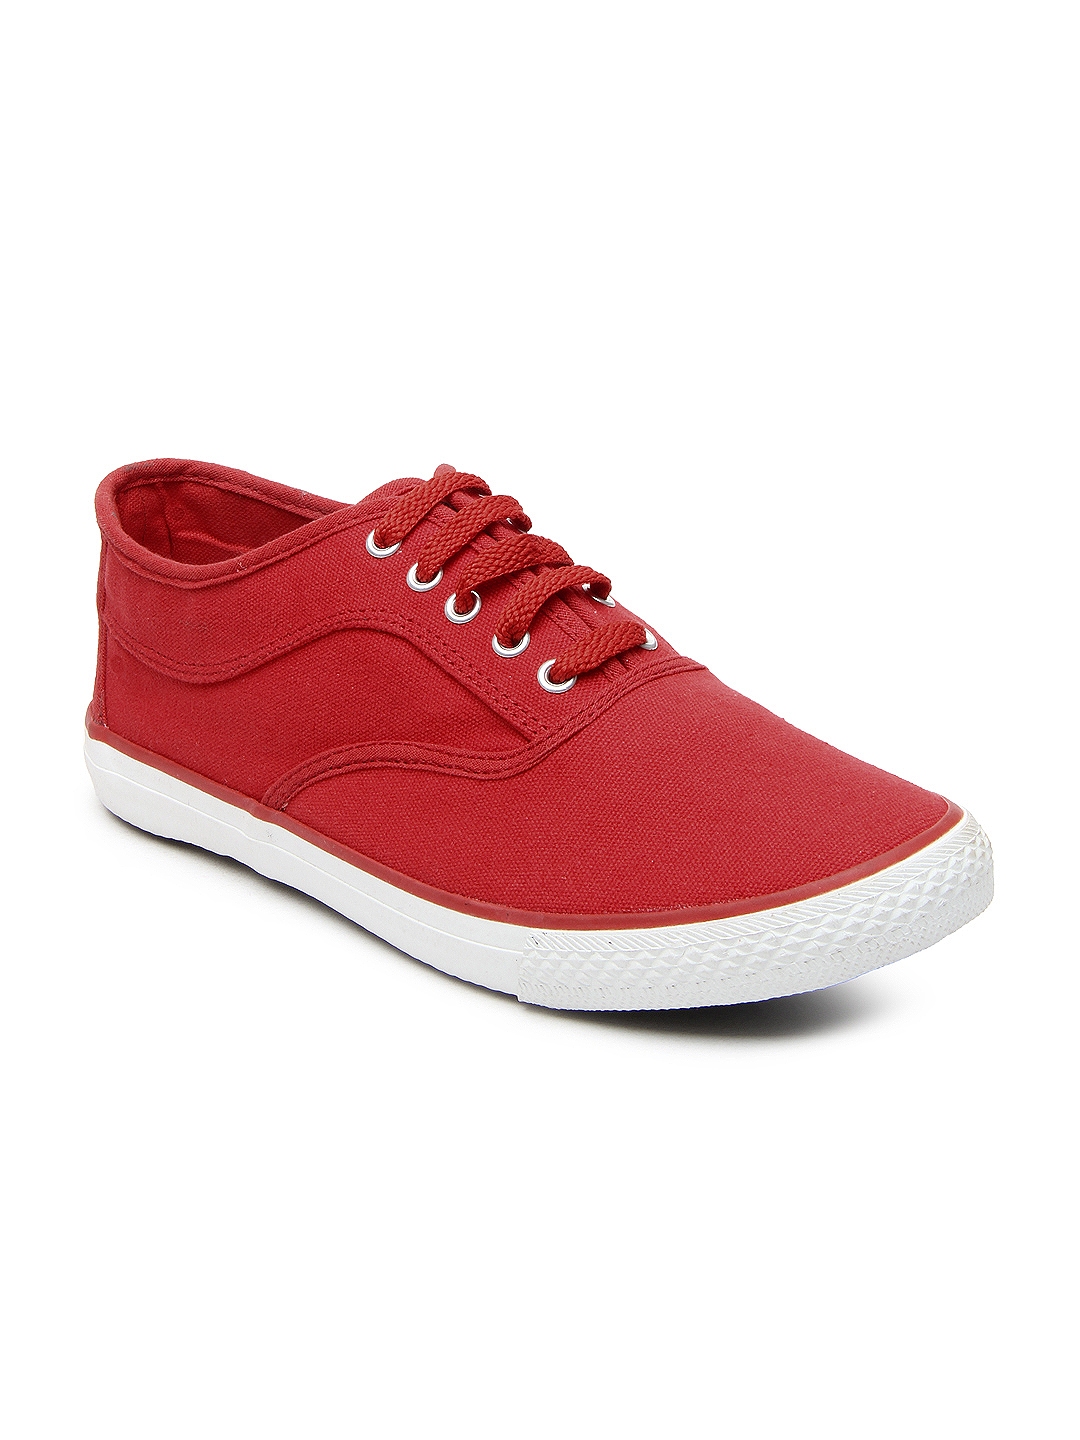 Buy Roadster Men Red Casual Shoes - Casual Shoes for Men 283513 | Myntra